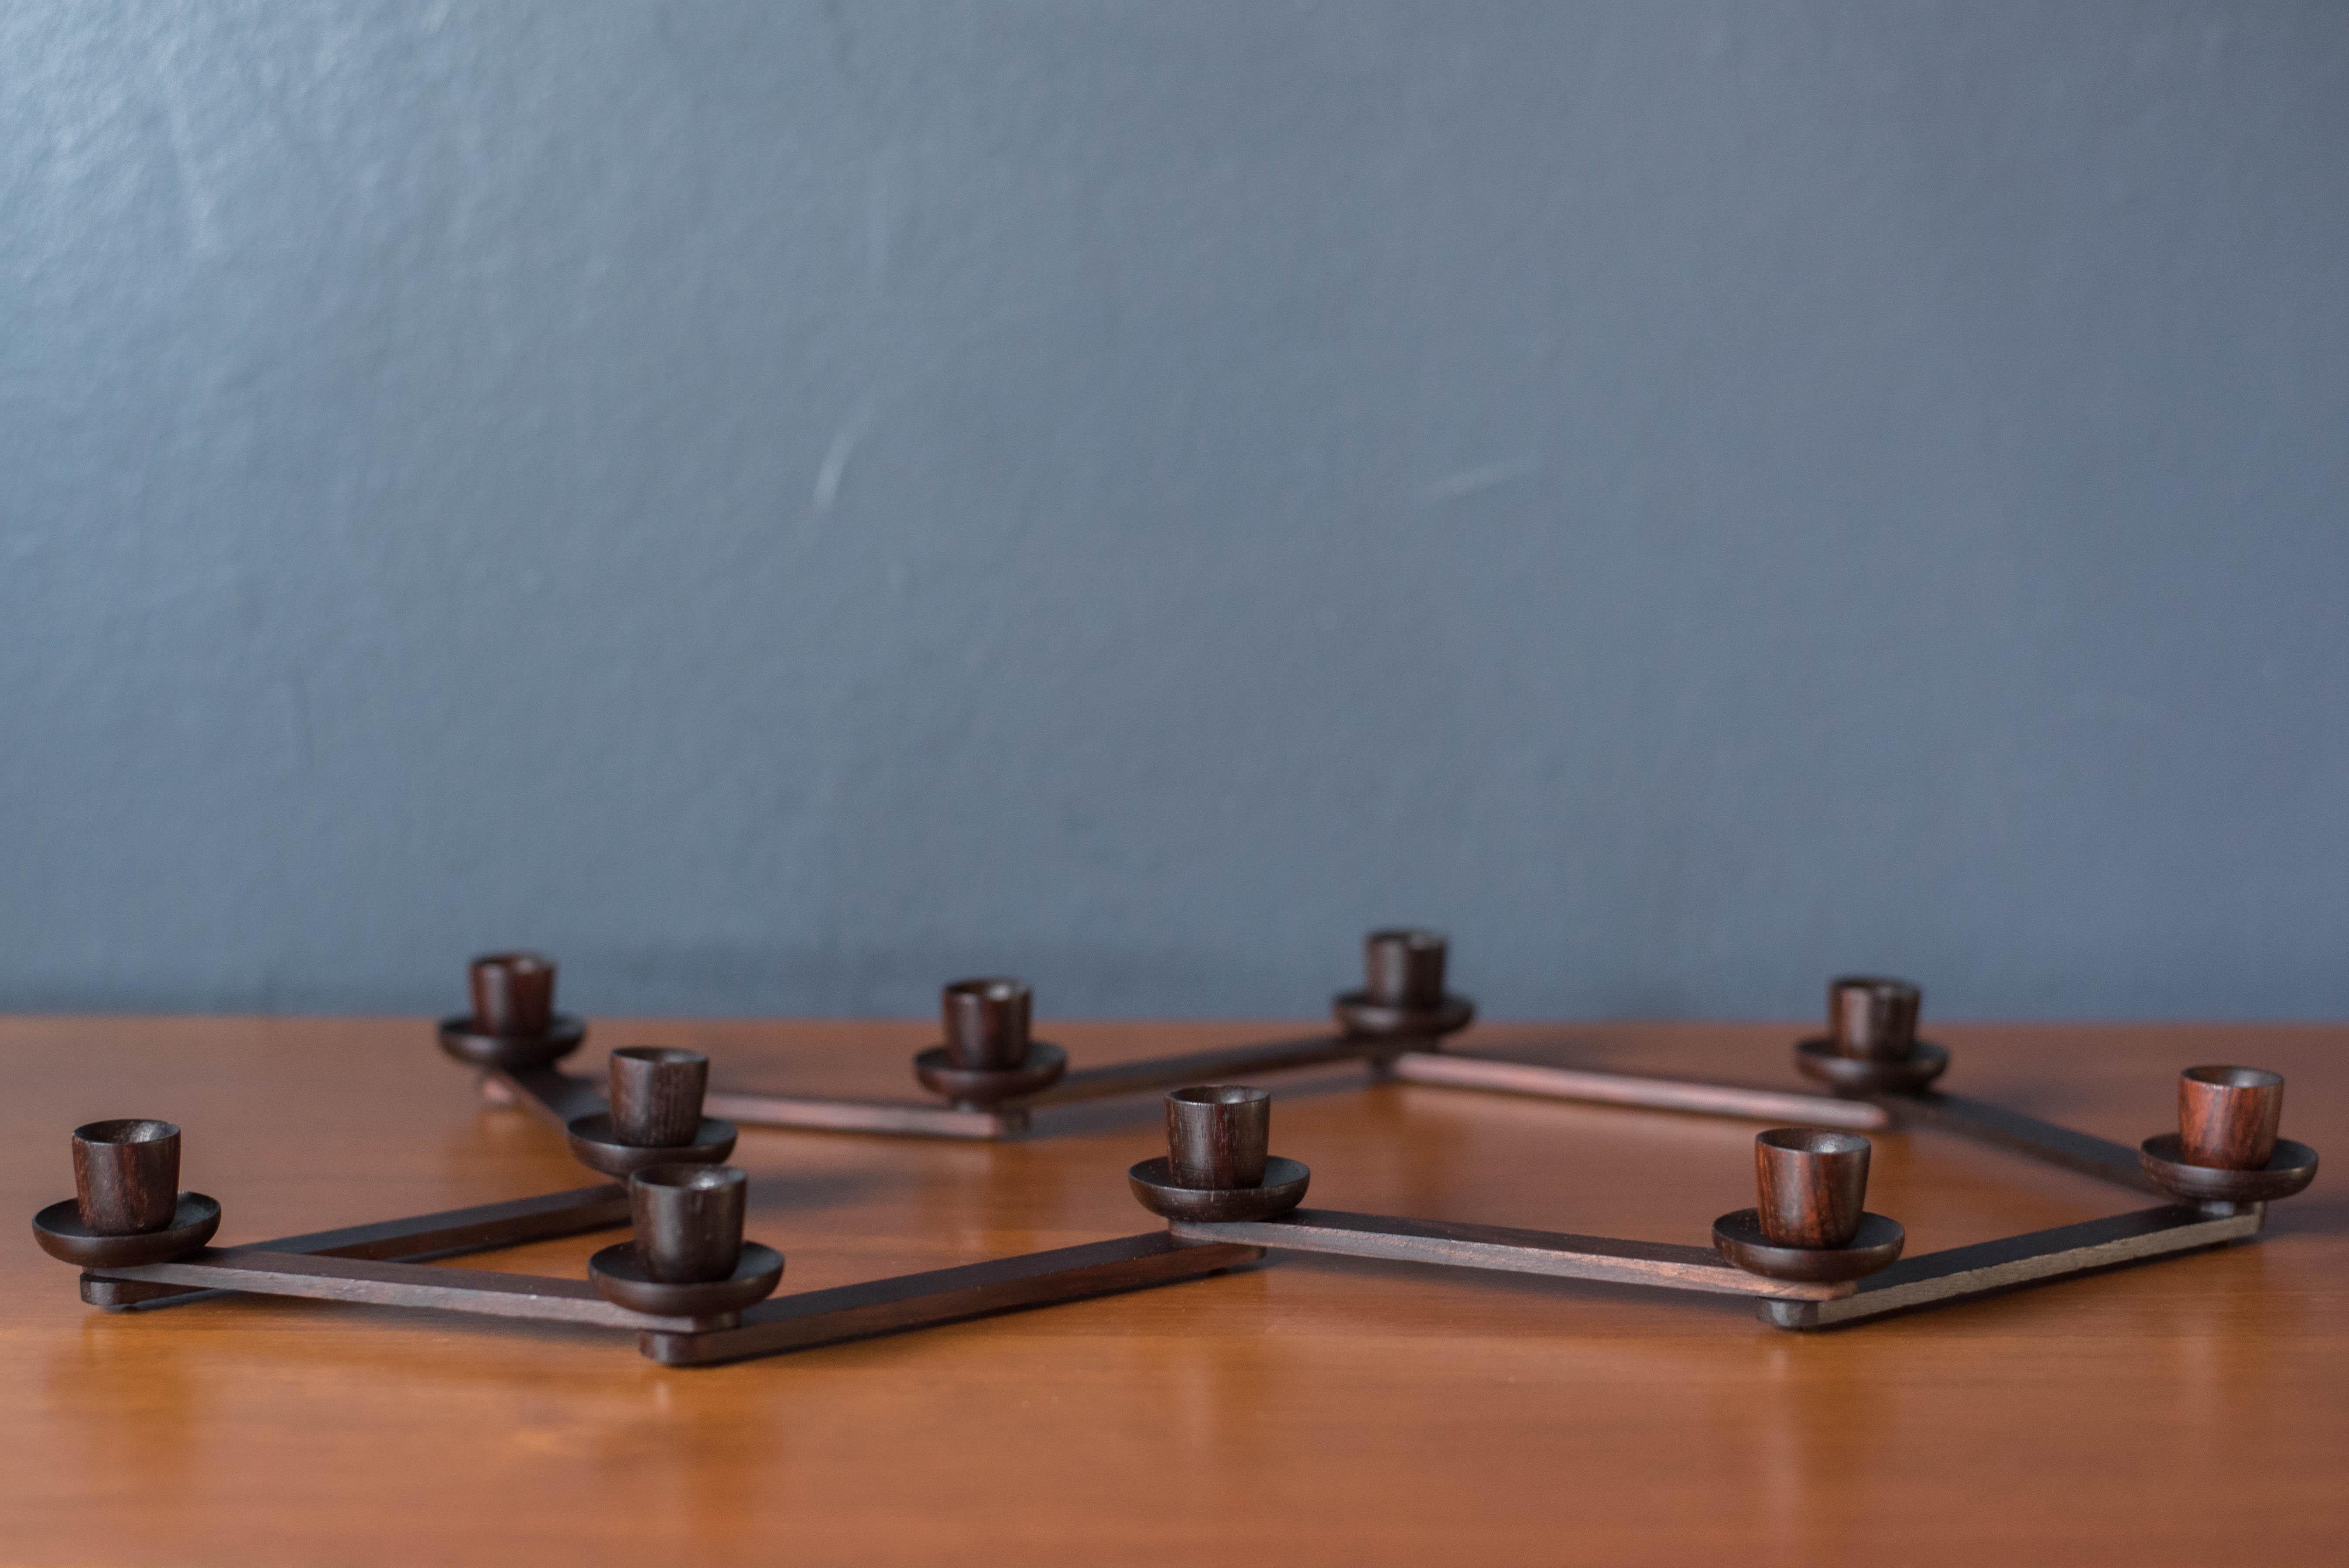 Mid-Century Modern centerpiece candleholders in rosewood circa 1970's. This unique piece includes 10 candle settings that can be arranged in multiple configurations. Perfect for accessorizing a dining room tablescape or entryway console. Fits 1/2